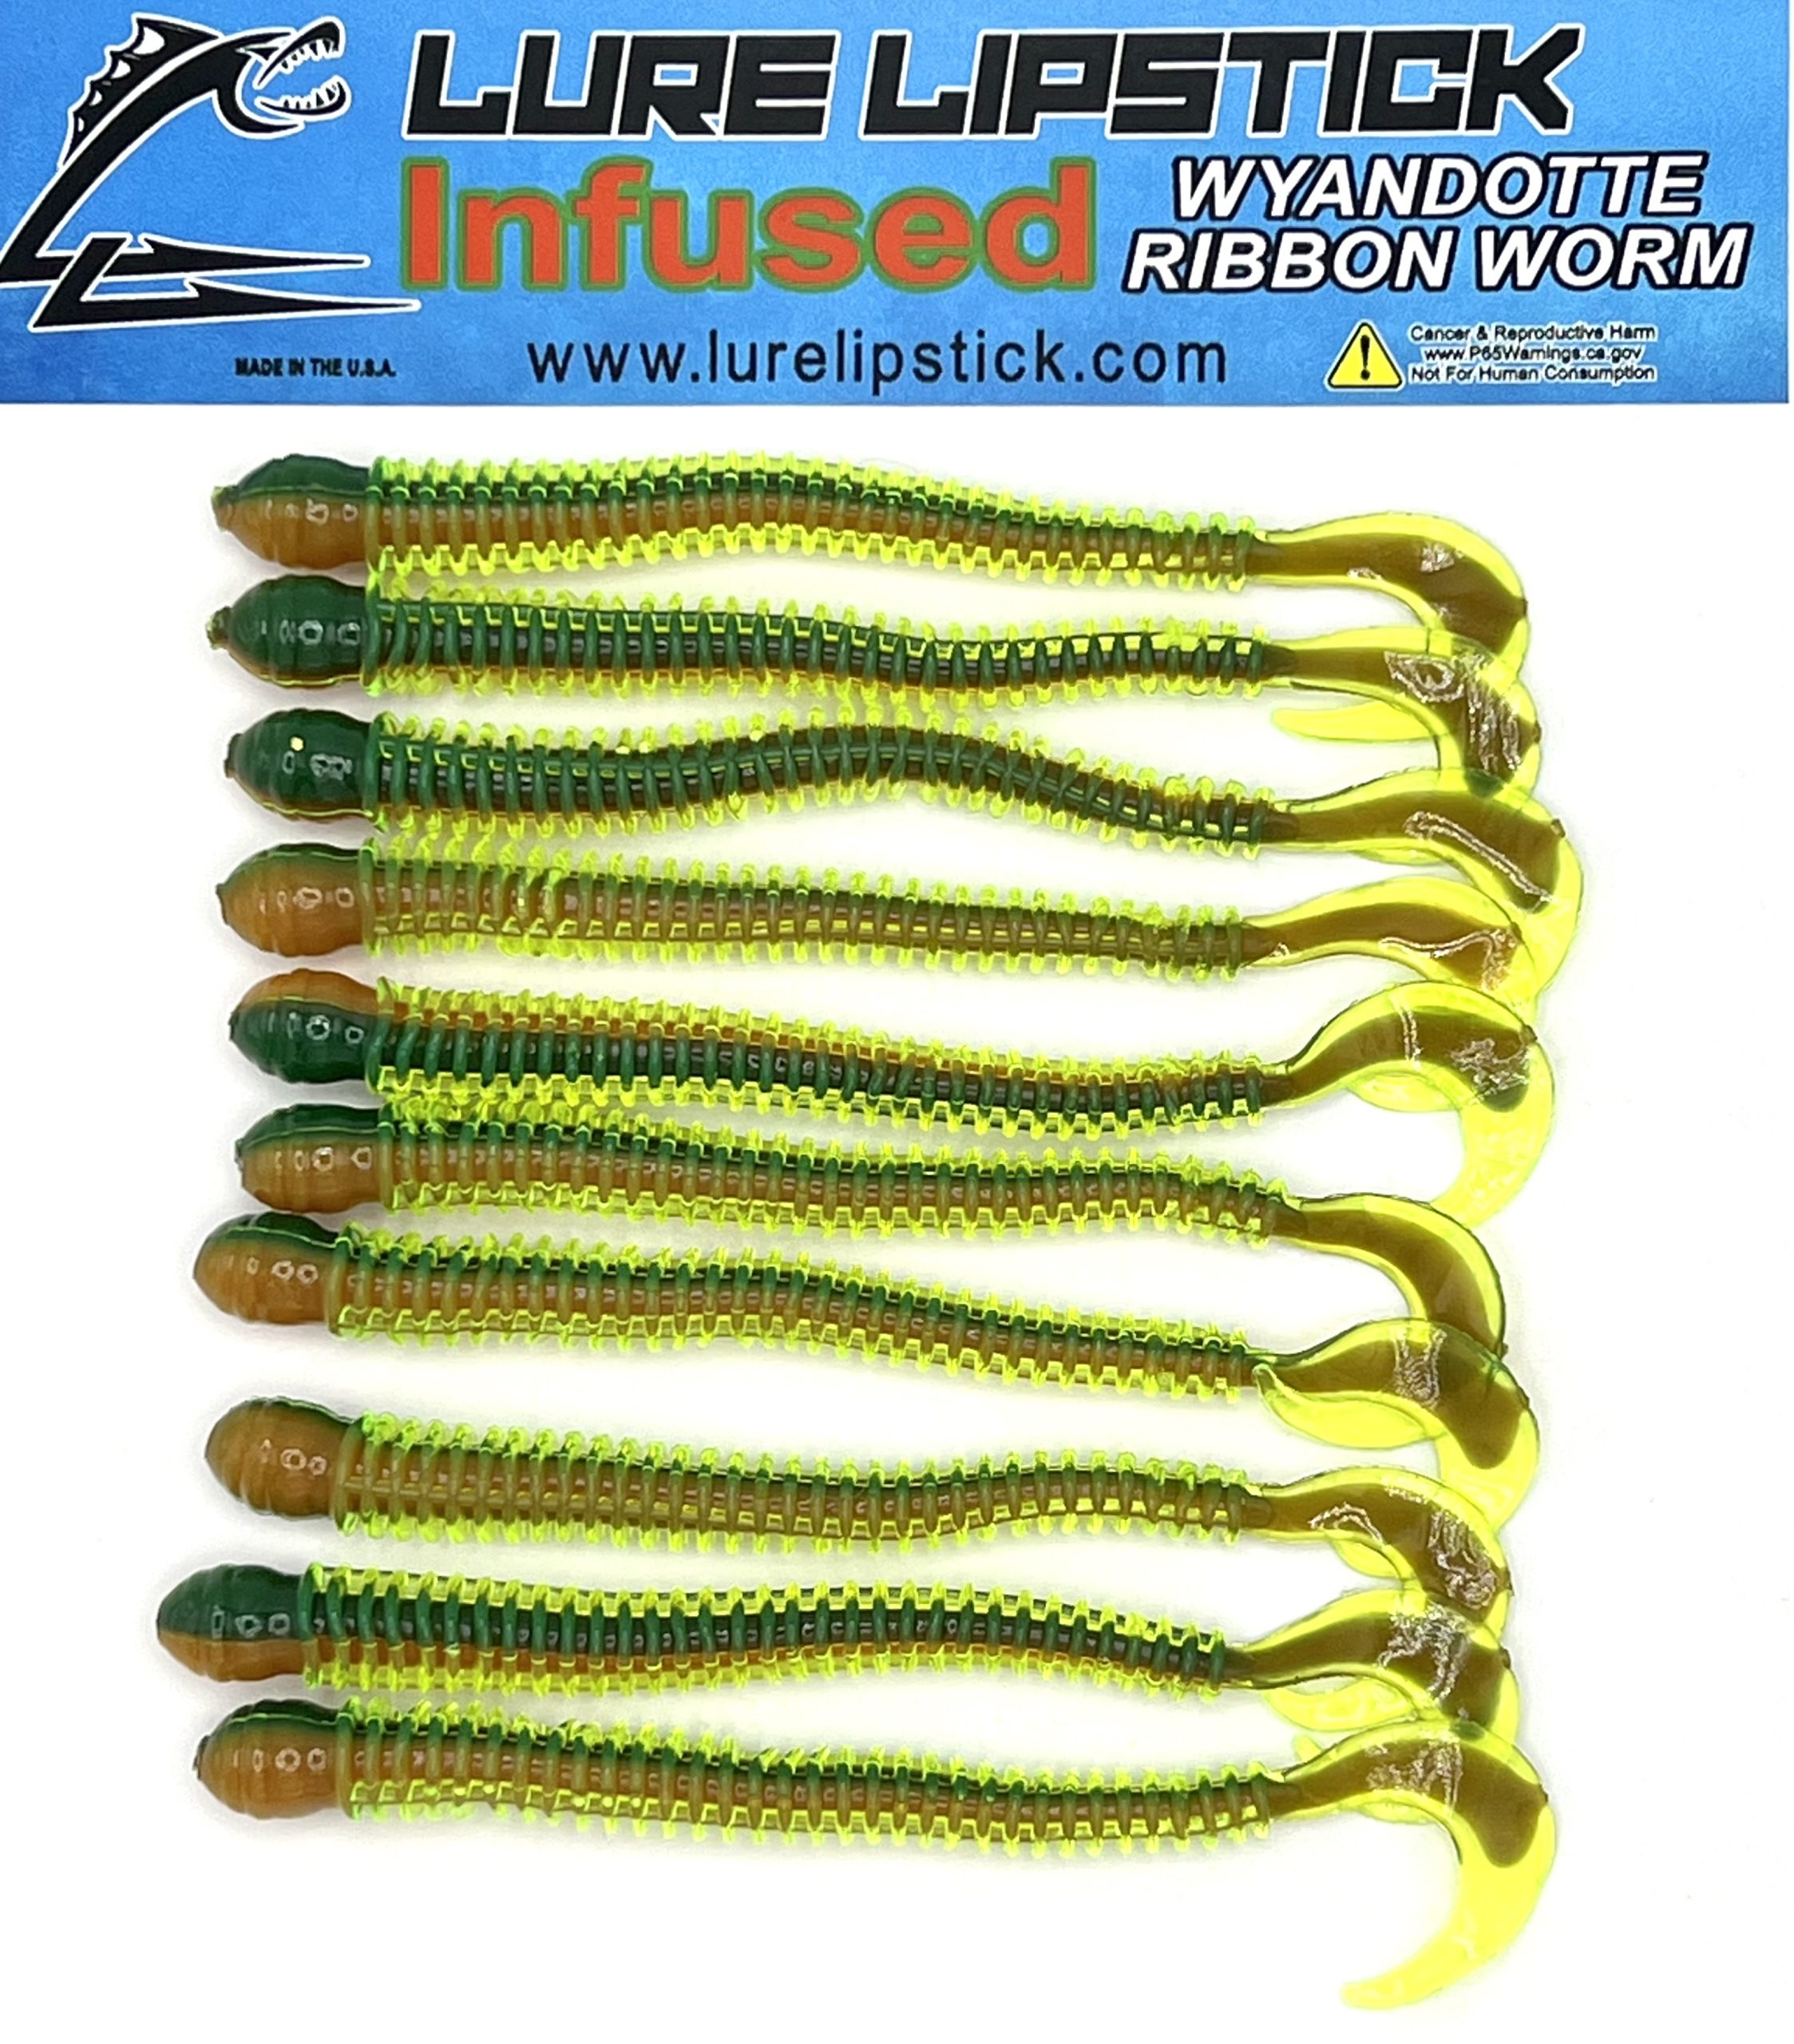 4 Inch 10 Pack Infused Custom Wyandotte Ribbon Worms- Fire Tiger